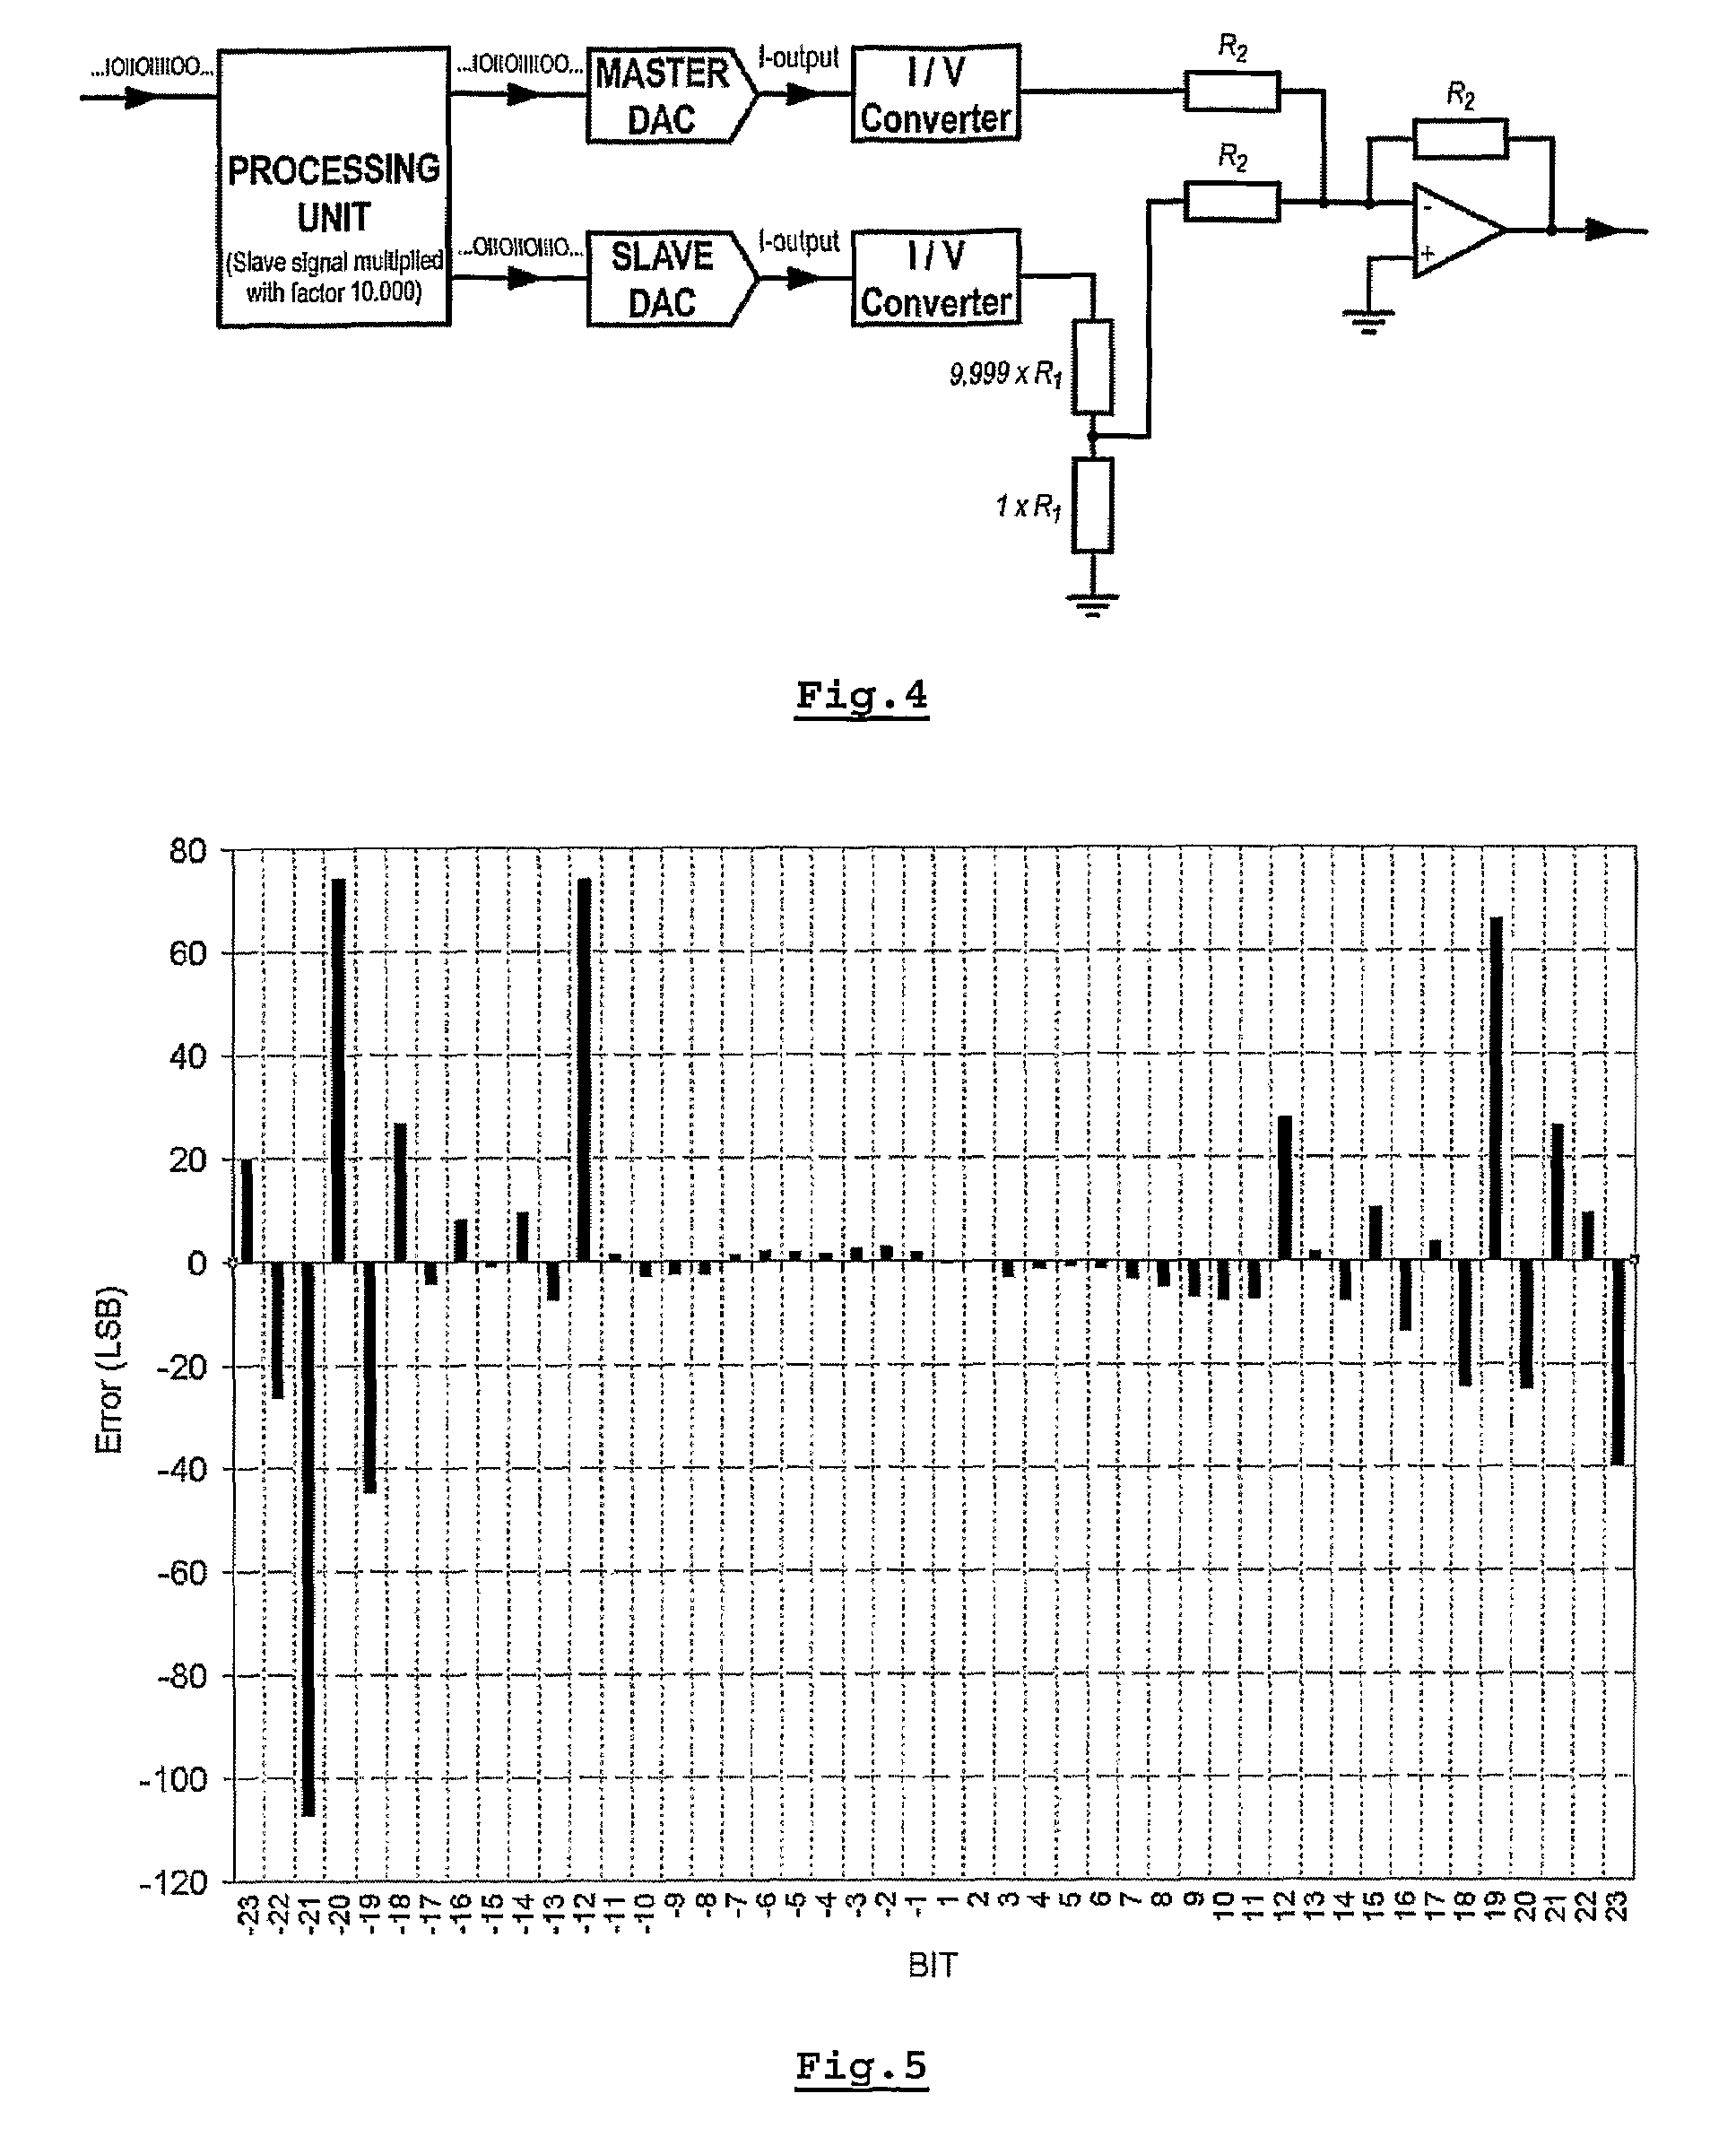 Digital-to-analogue converter system with increased performance